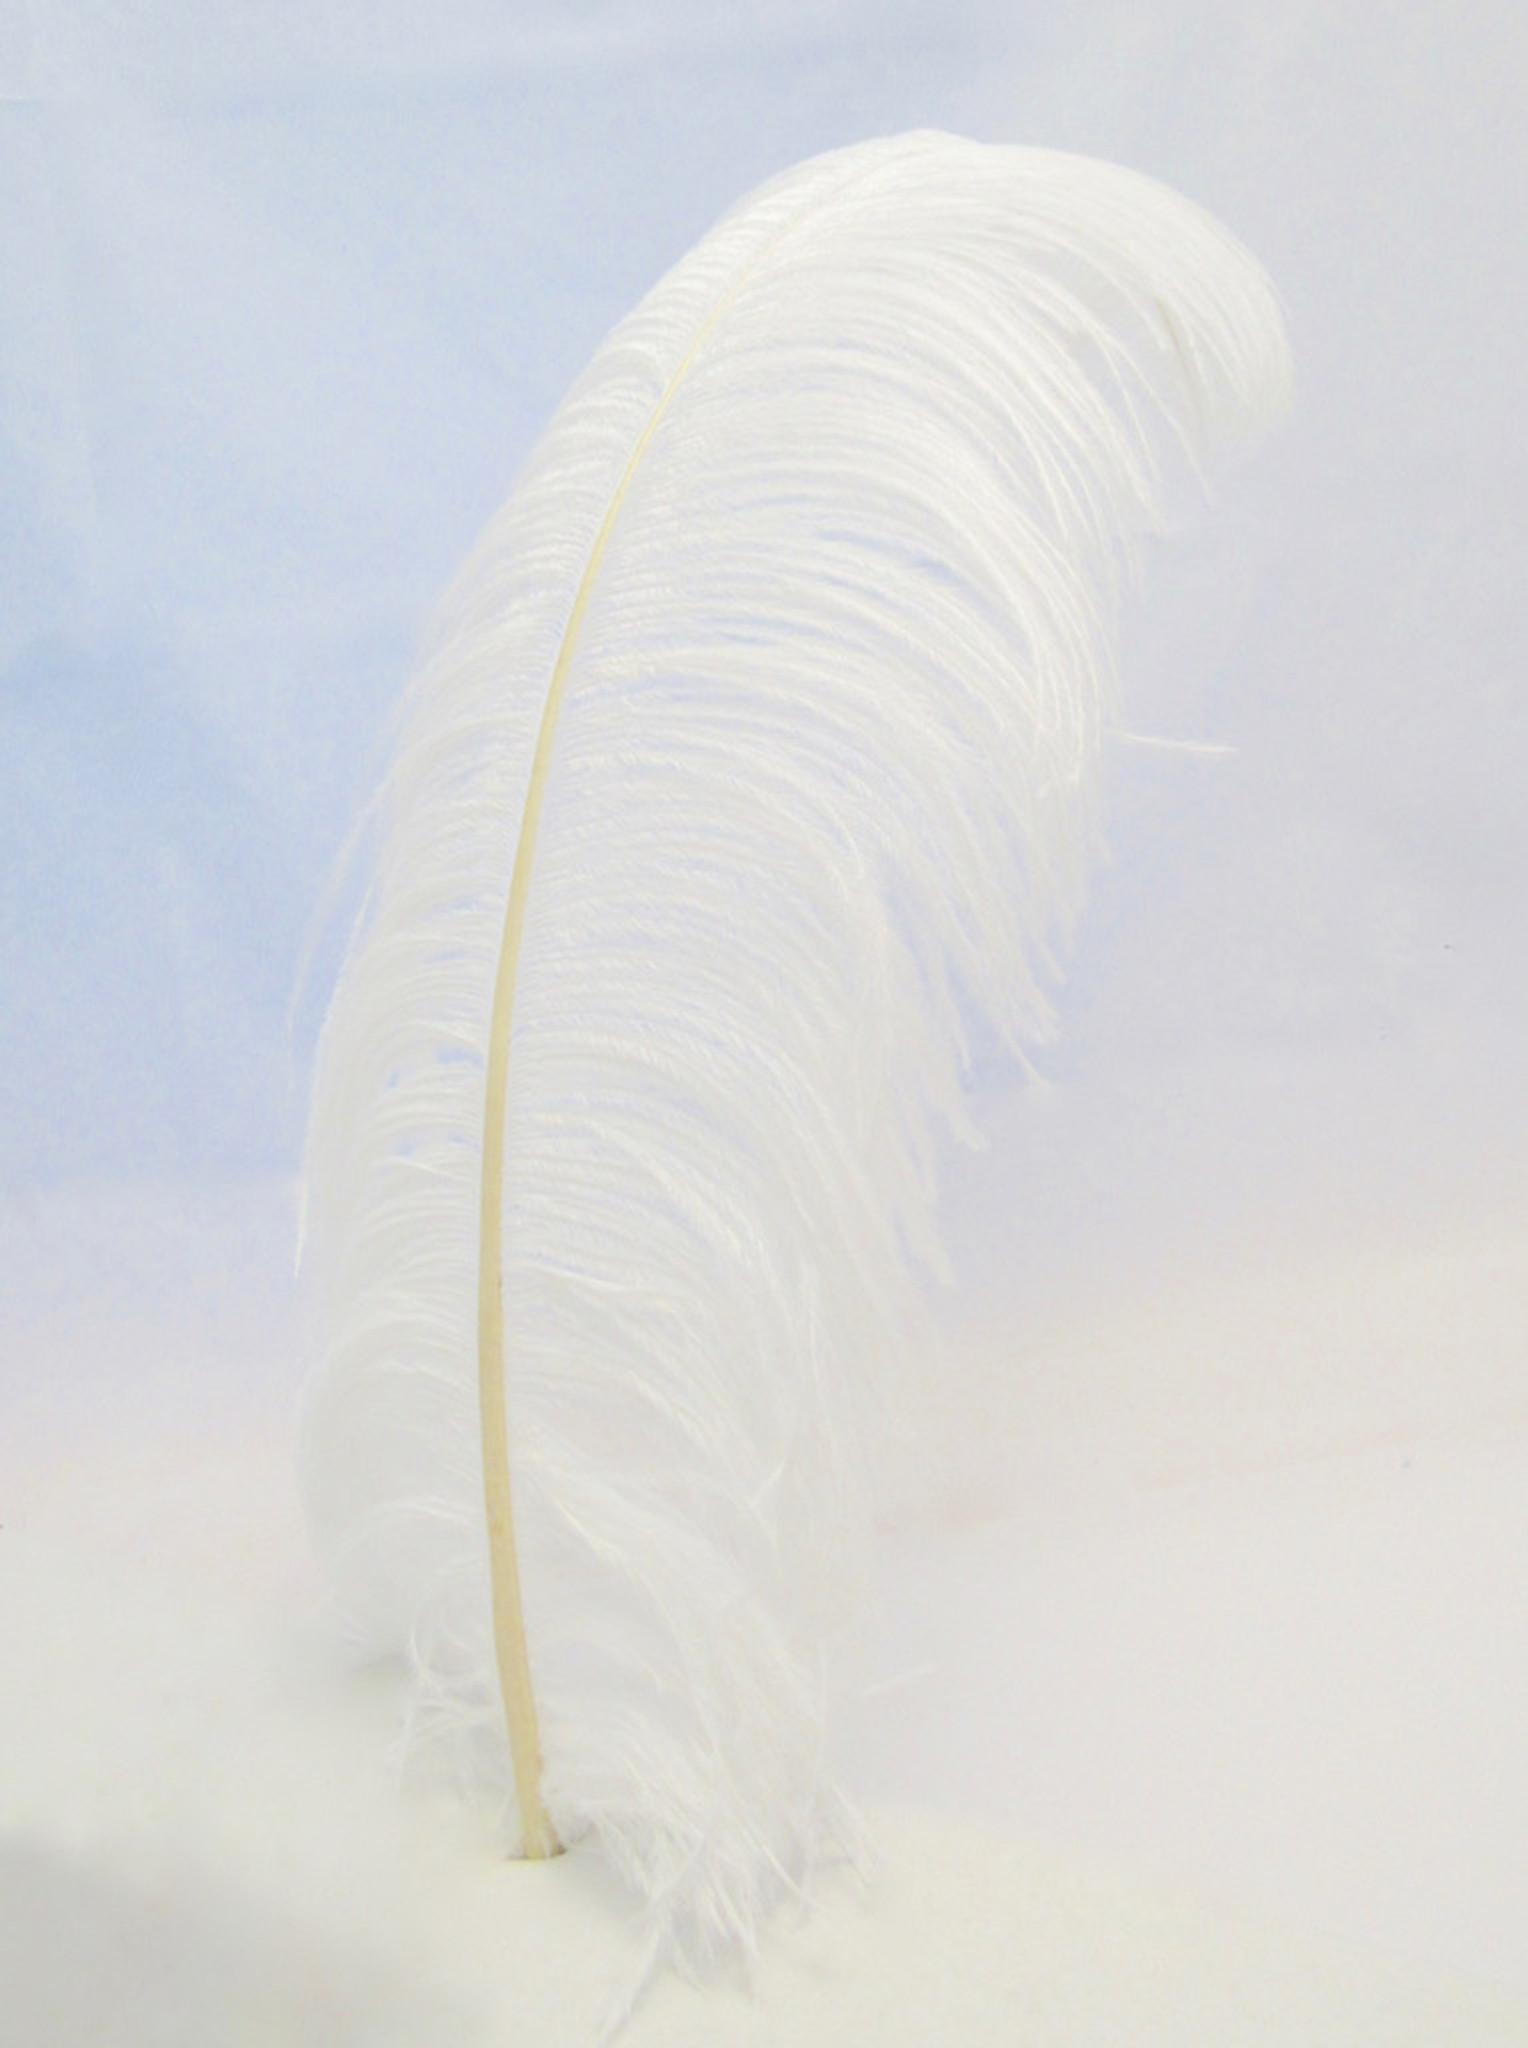 EXTRA LARGE, Ostrich Wing Plumes 25''-29'', Bleached White (1/2 Pound)